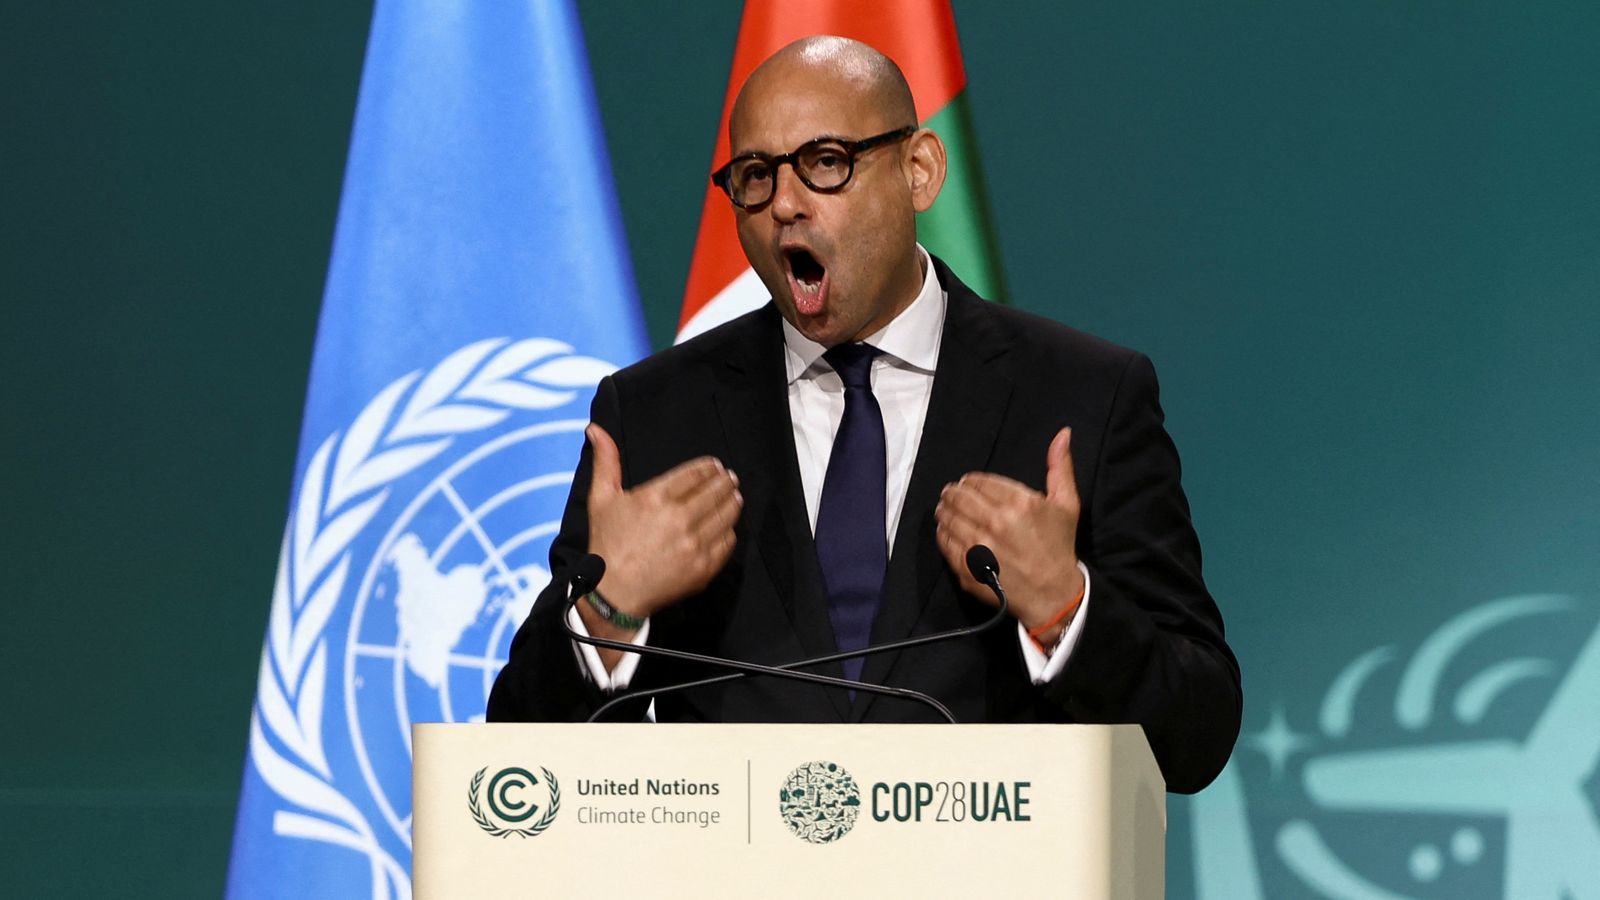 COP28 must bring 'terminal decline of fossil fuels' or risk humanity's 'own terminal decline' - UN climate chief